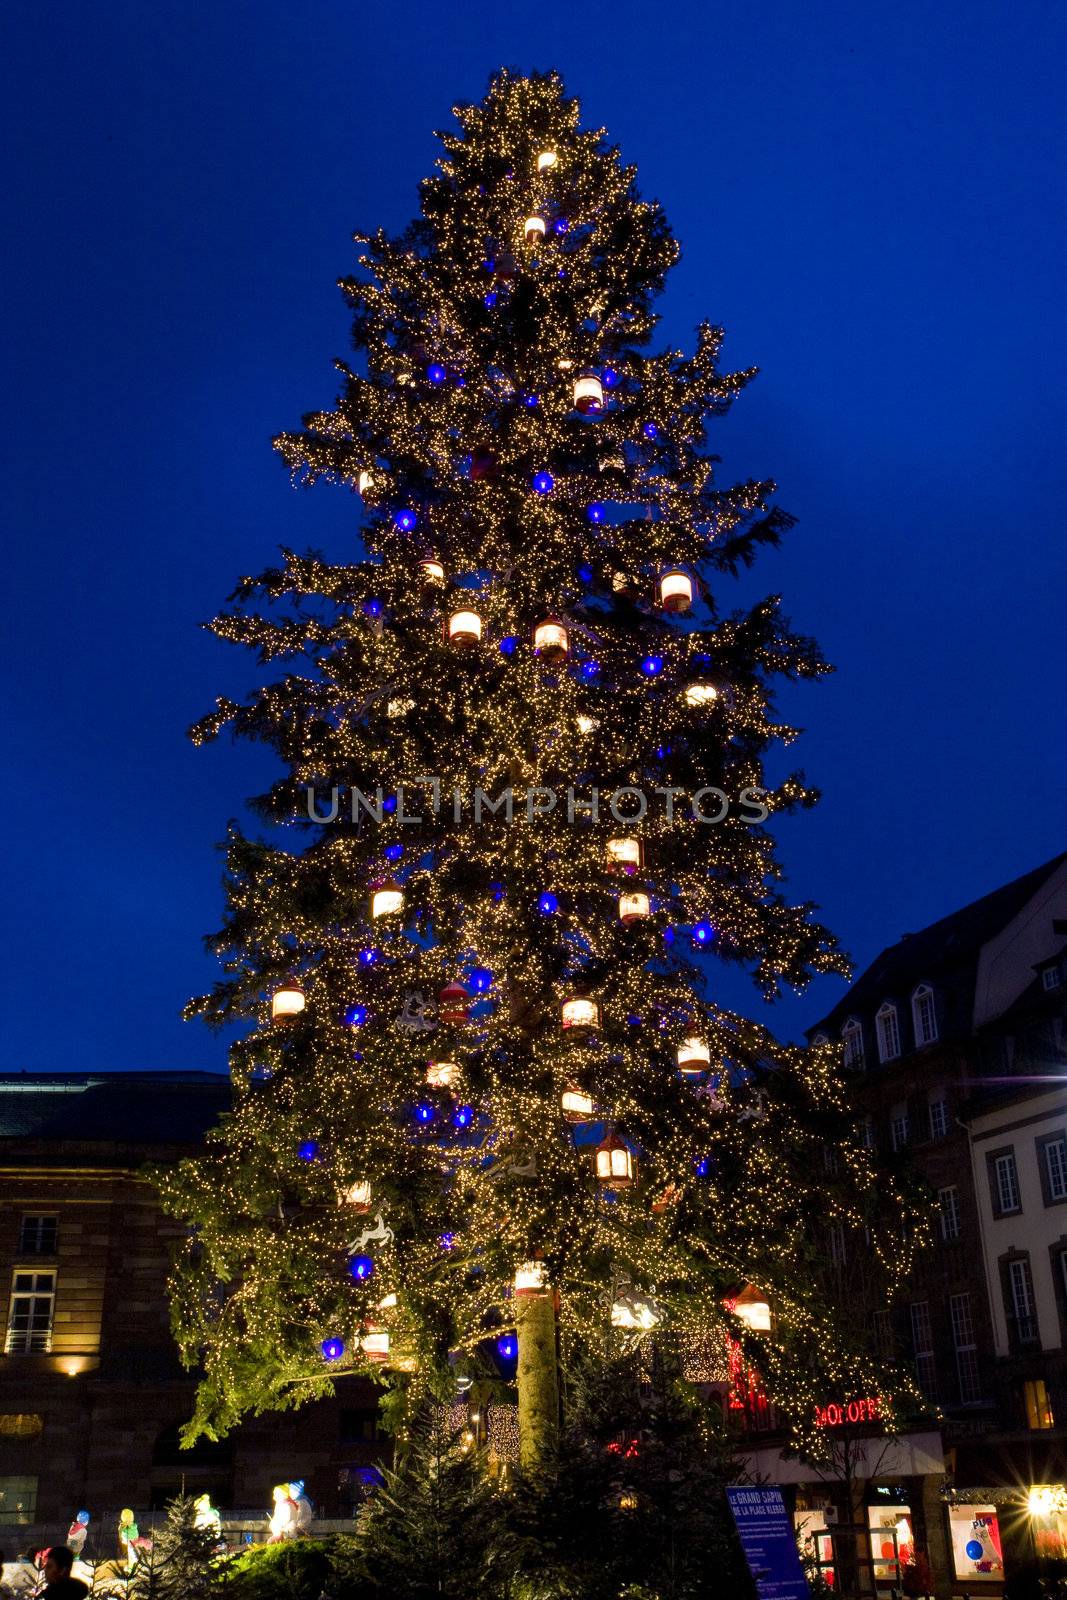 Christmas time in Strasbourg, Alsace, France